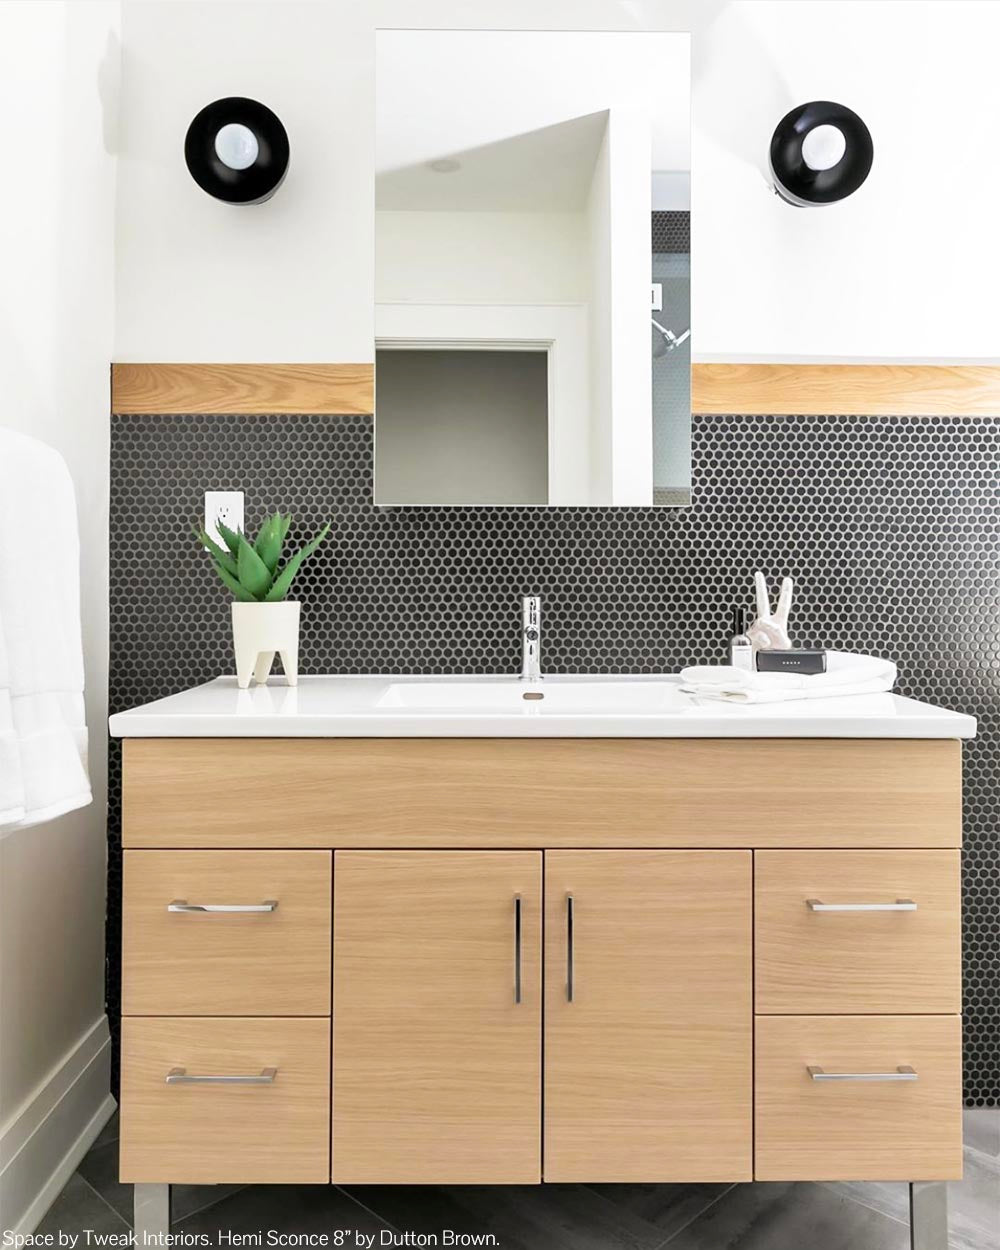 Nickel and black color Hemi sconces 8" by Dutton Brown. Space and photo by Tweak Interiors. _hover